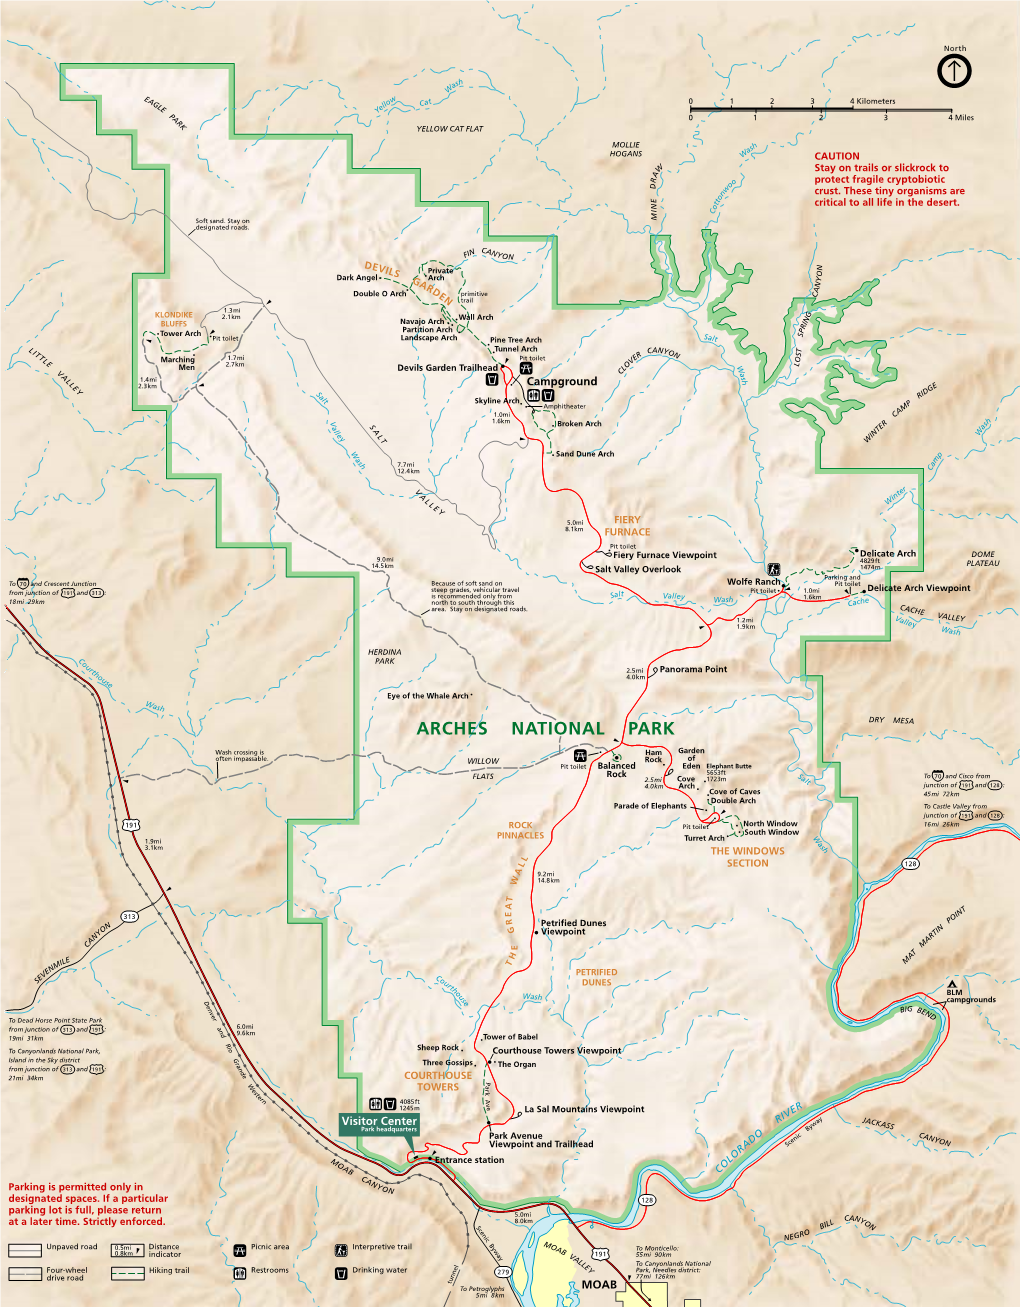 PDF Format Map of Arches National Park